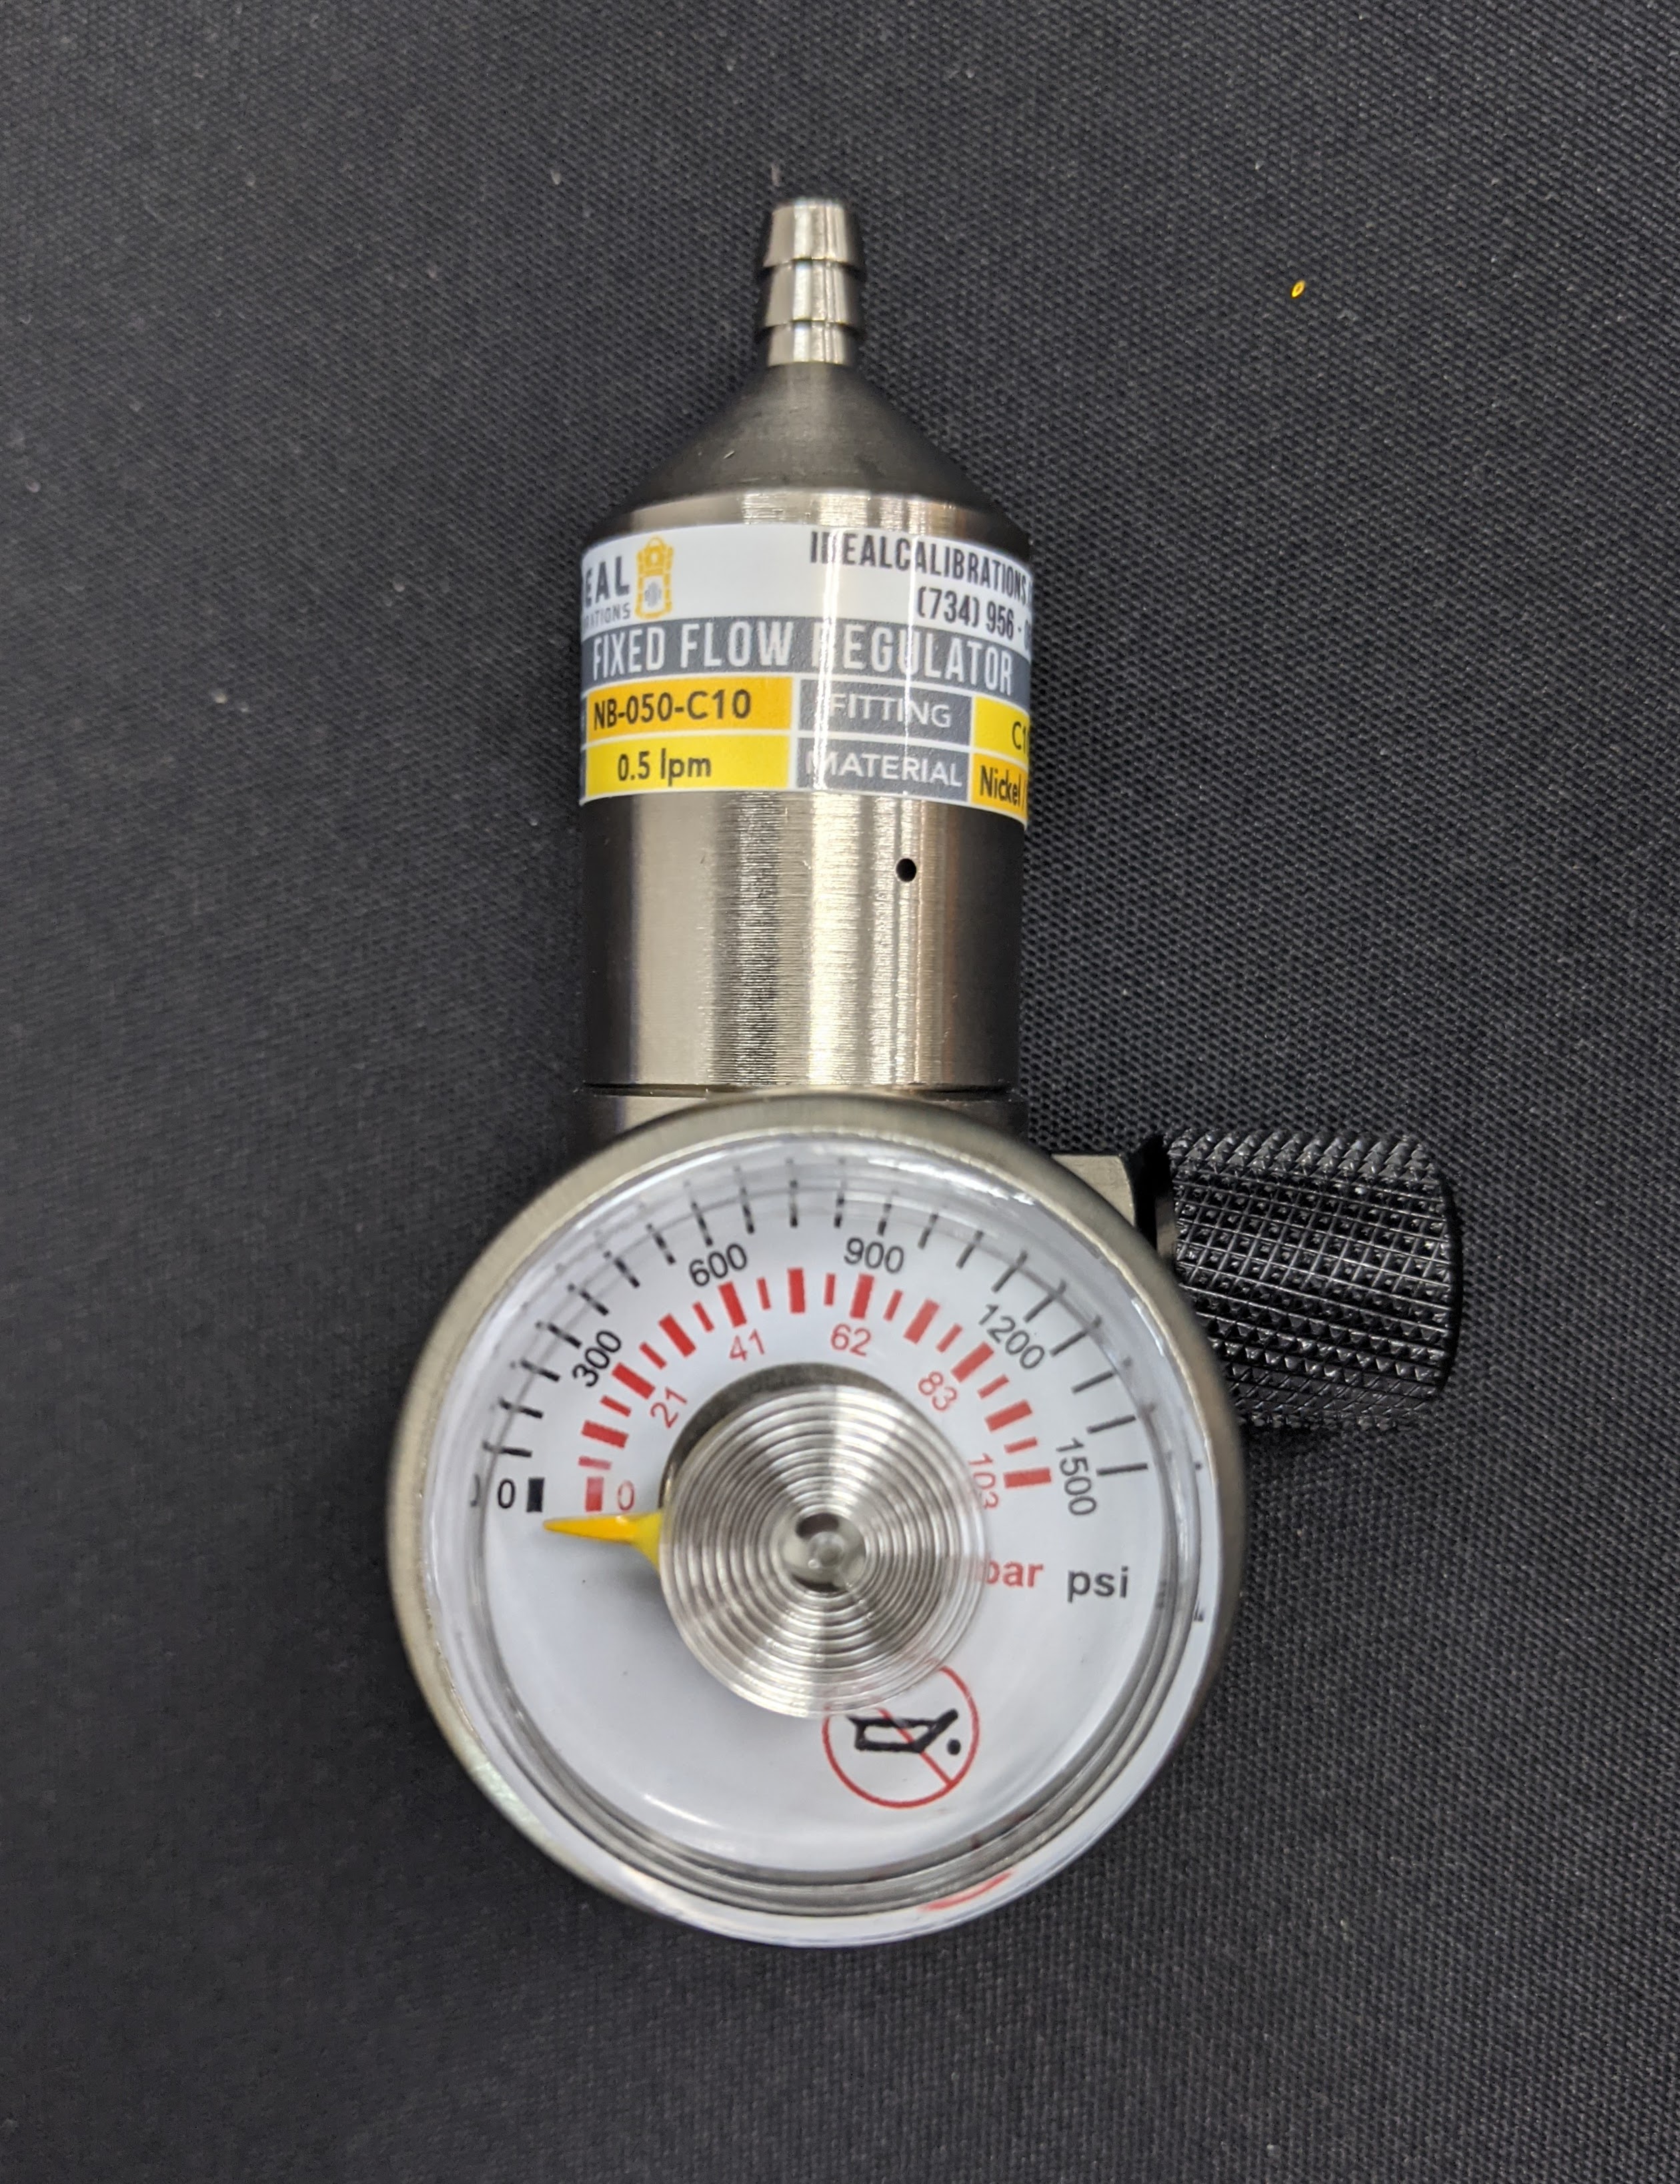 0.5 LPM Fixed Flow C10 Calibration Gas Regulator Questions & Answers